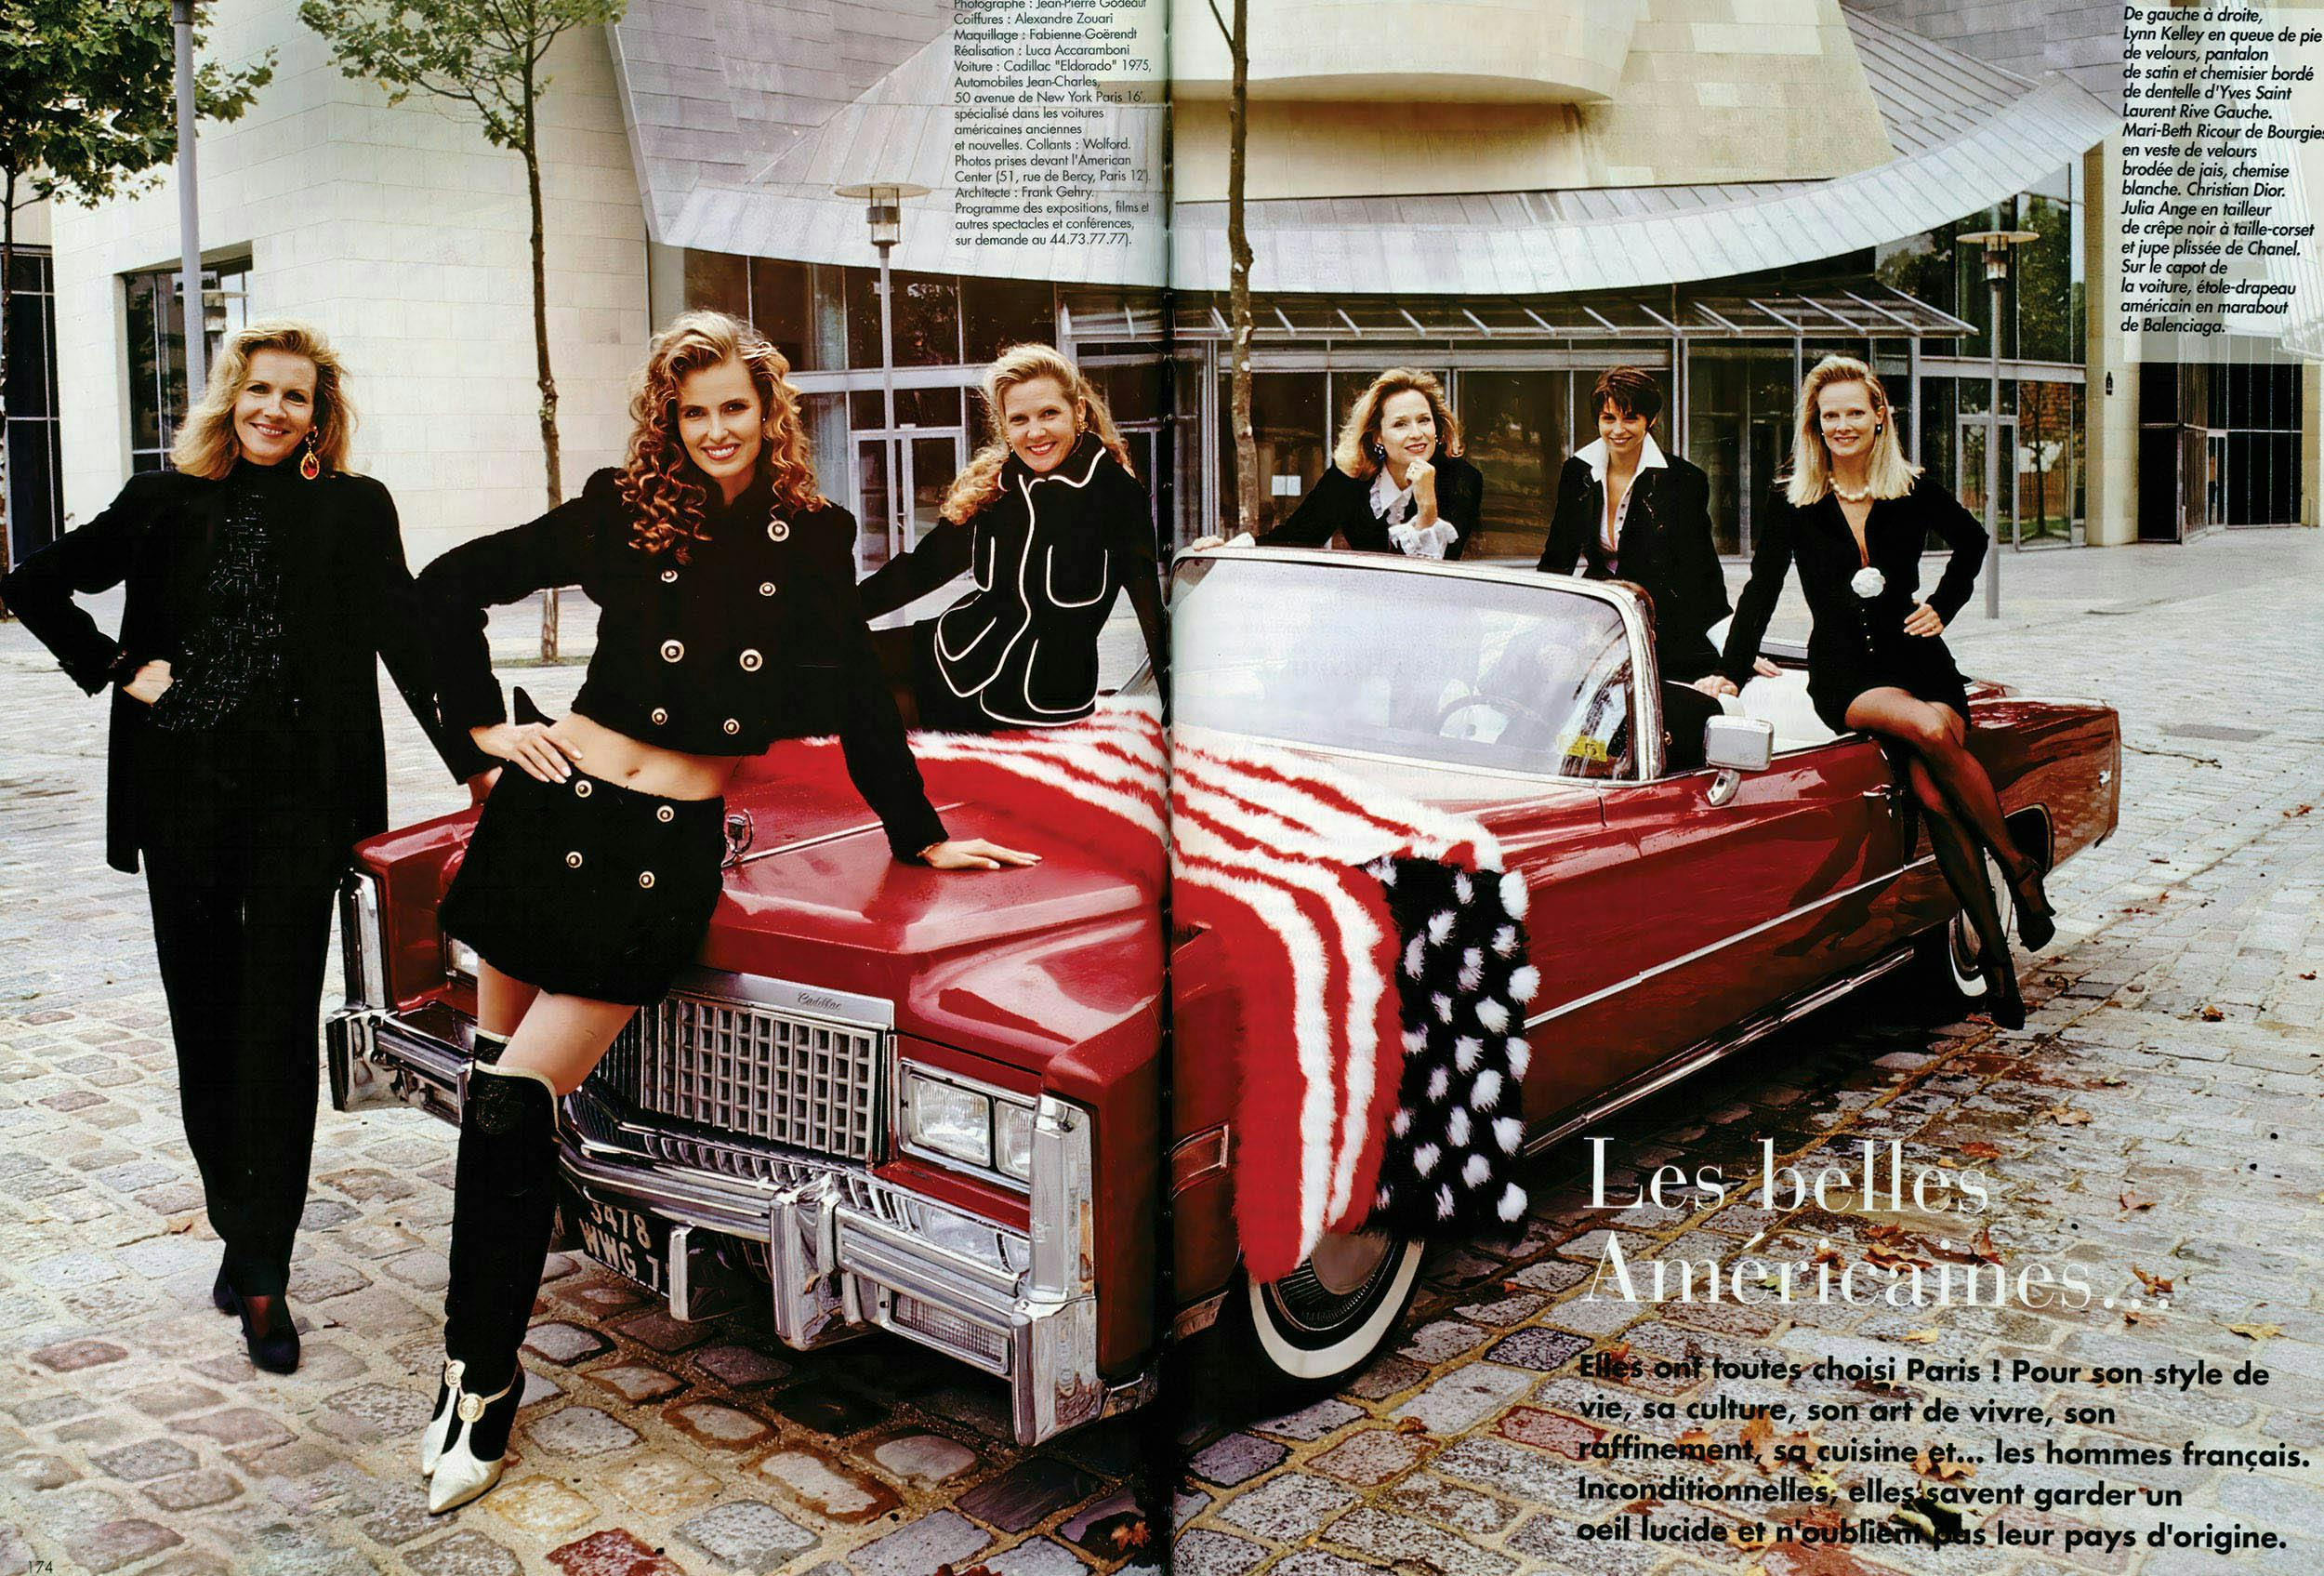 American women photographed for a 1994 issue of L’OFFICIEL.